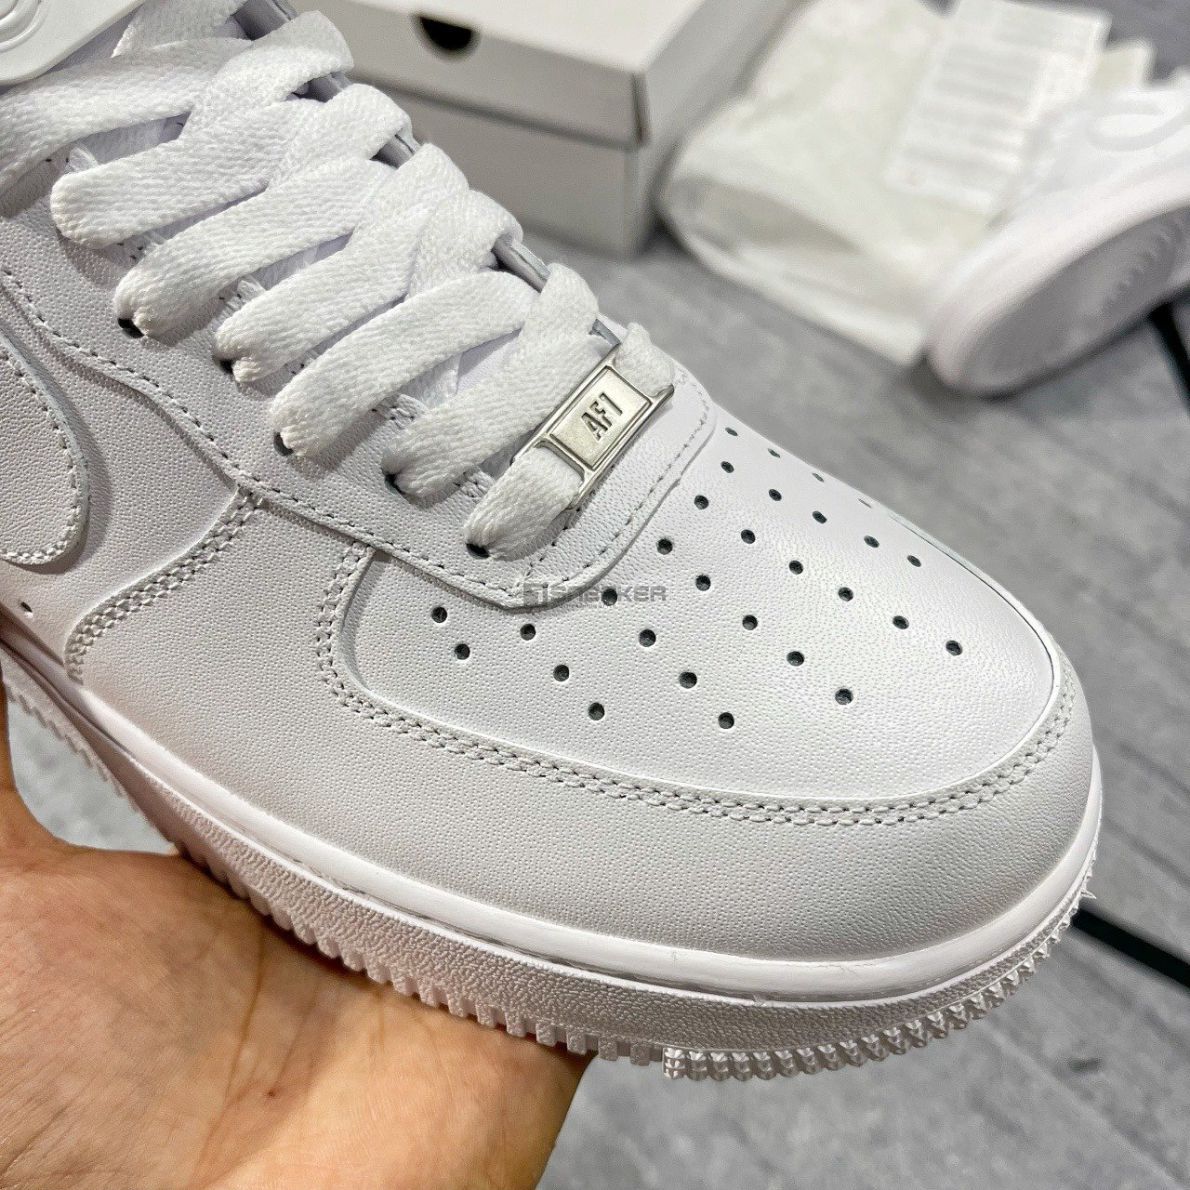 giay nike air Force 1 aF1 all white trang rep 1 1 2